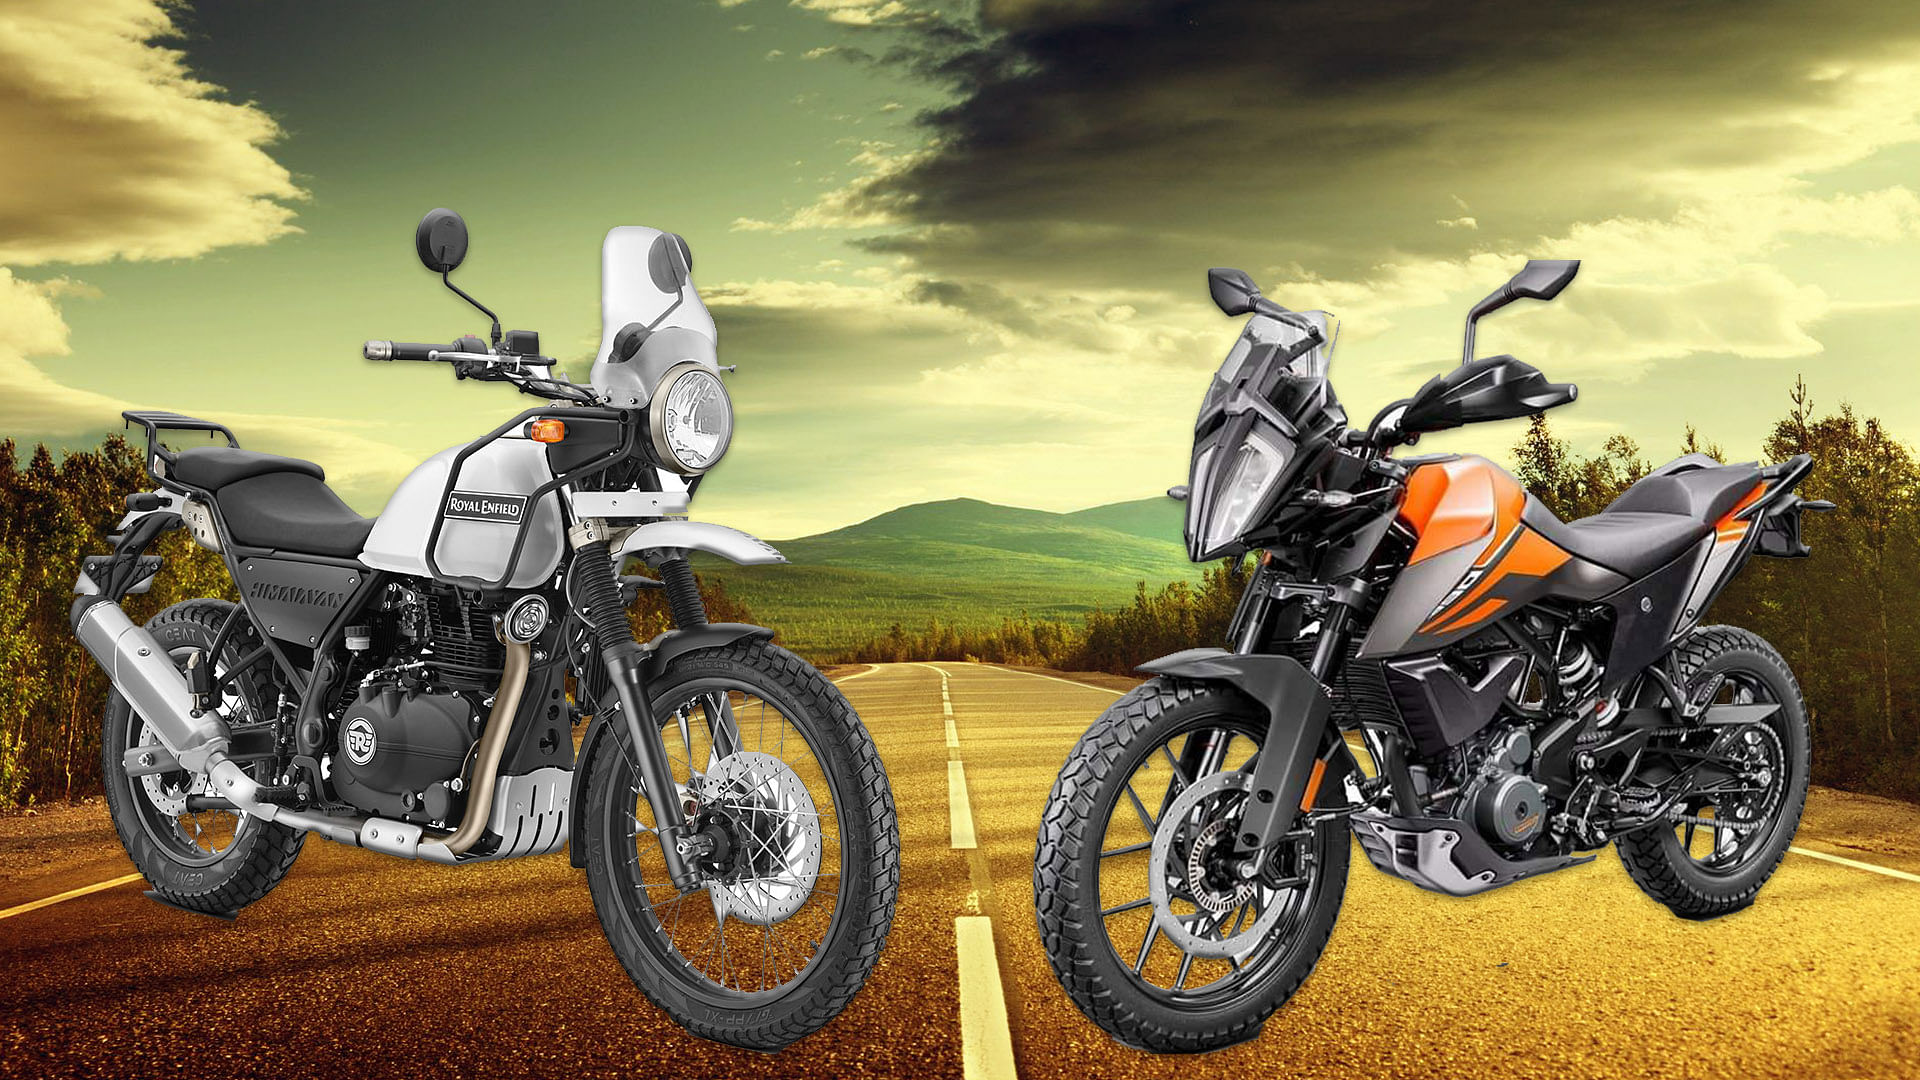 Royal Enfield Himalayan (left) and KTM 390 Adventure (right).